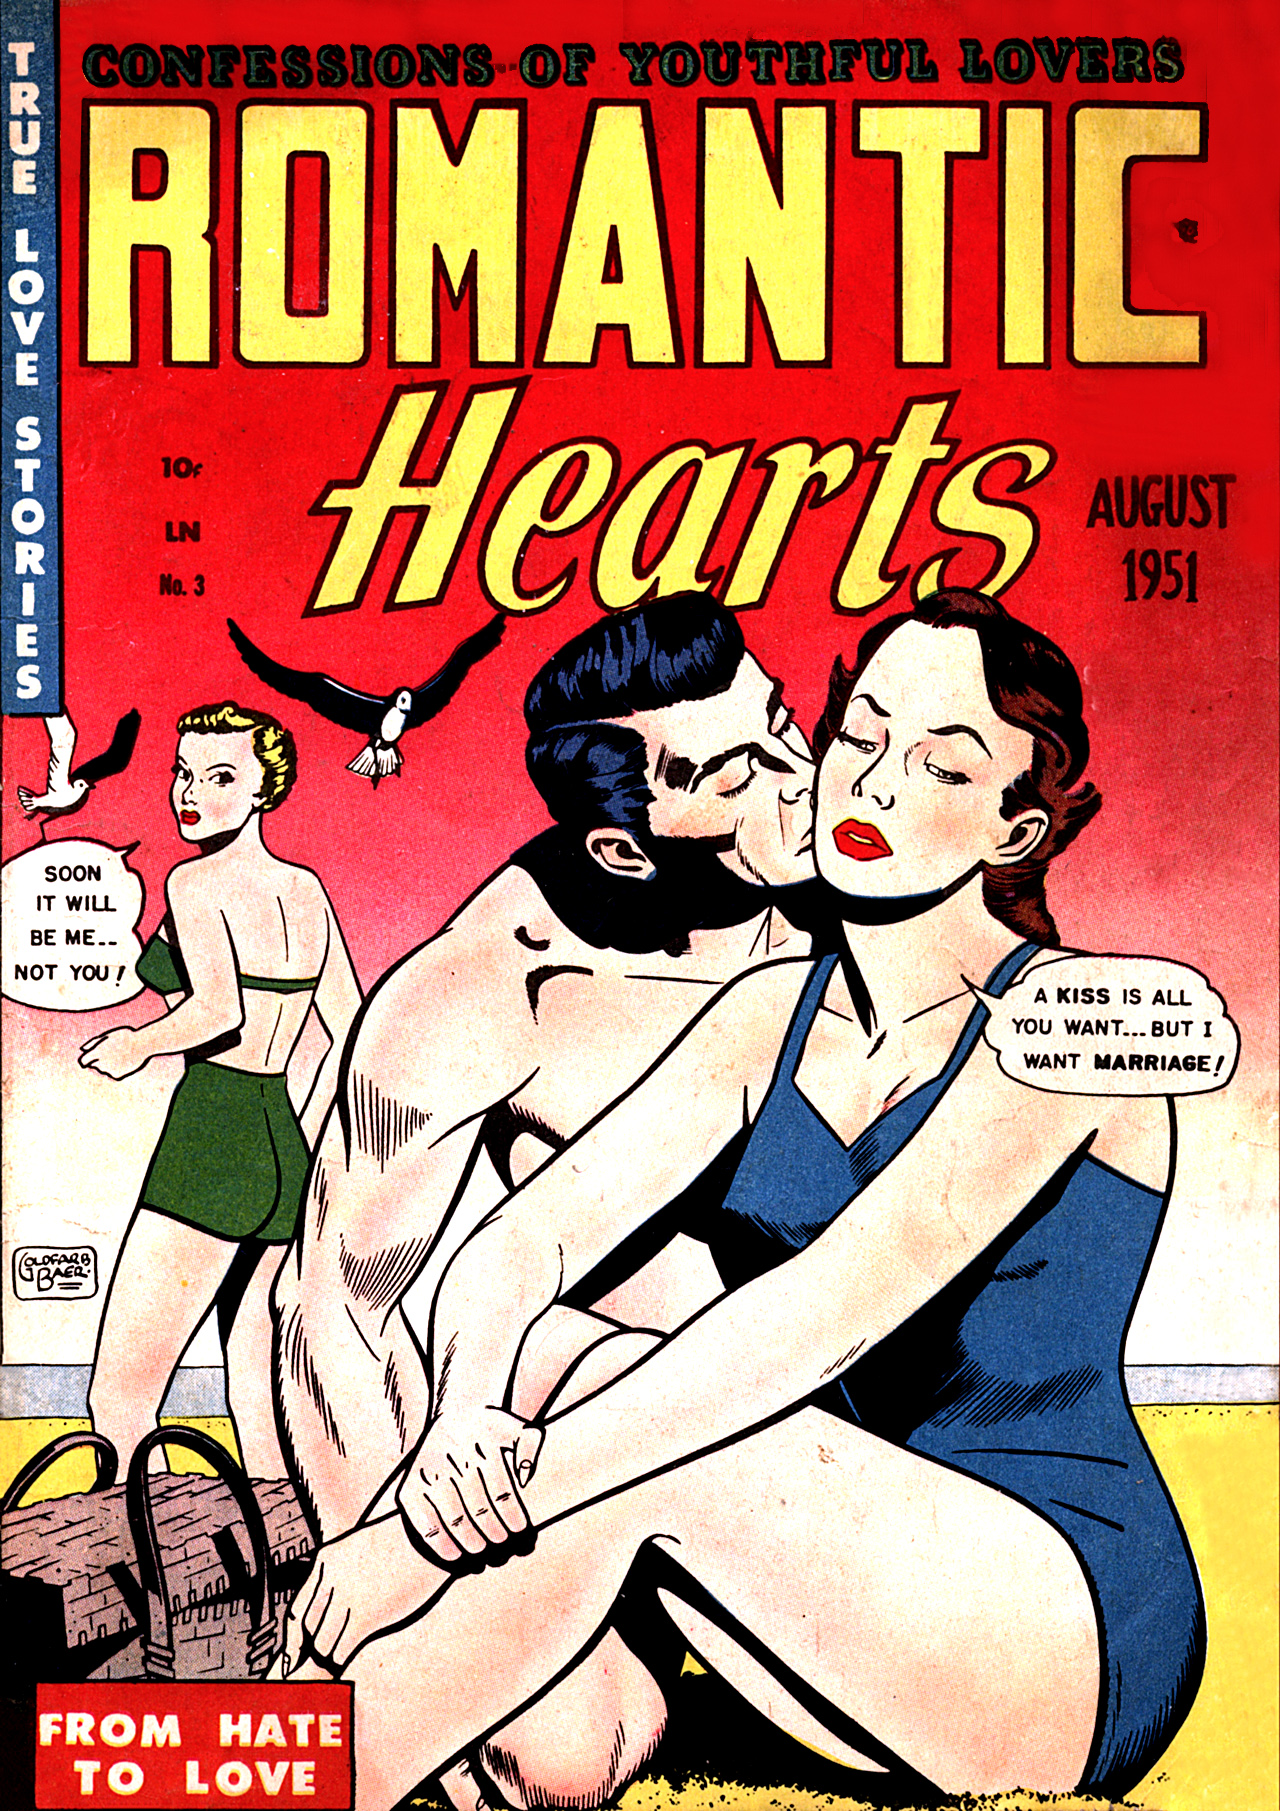 Read online Romantic Hearts comic -  Issue #3 - 1